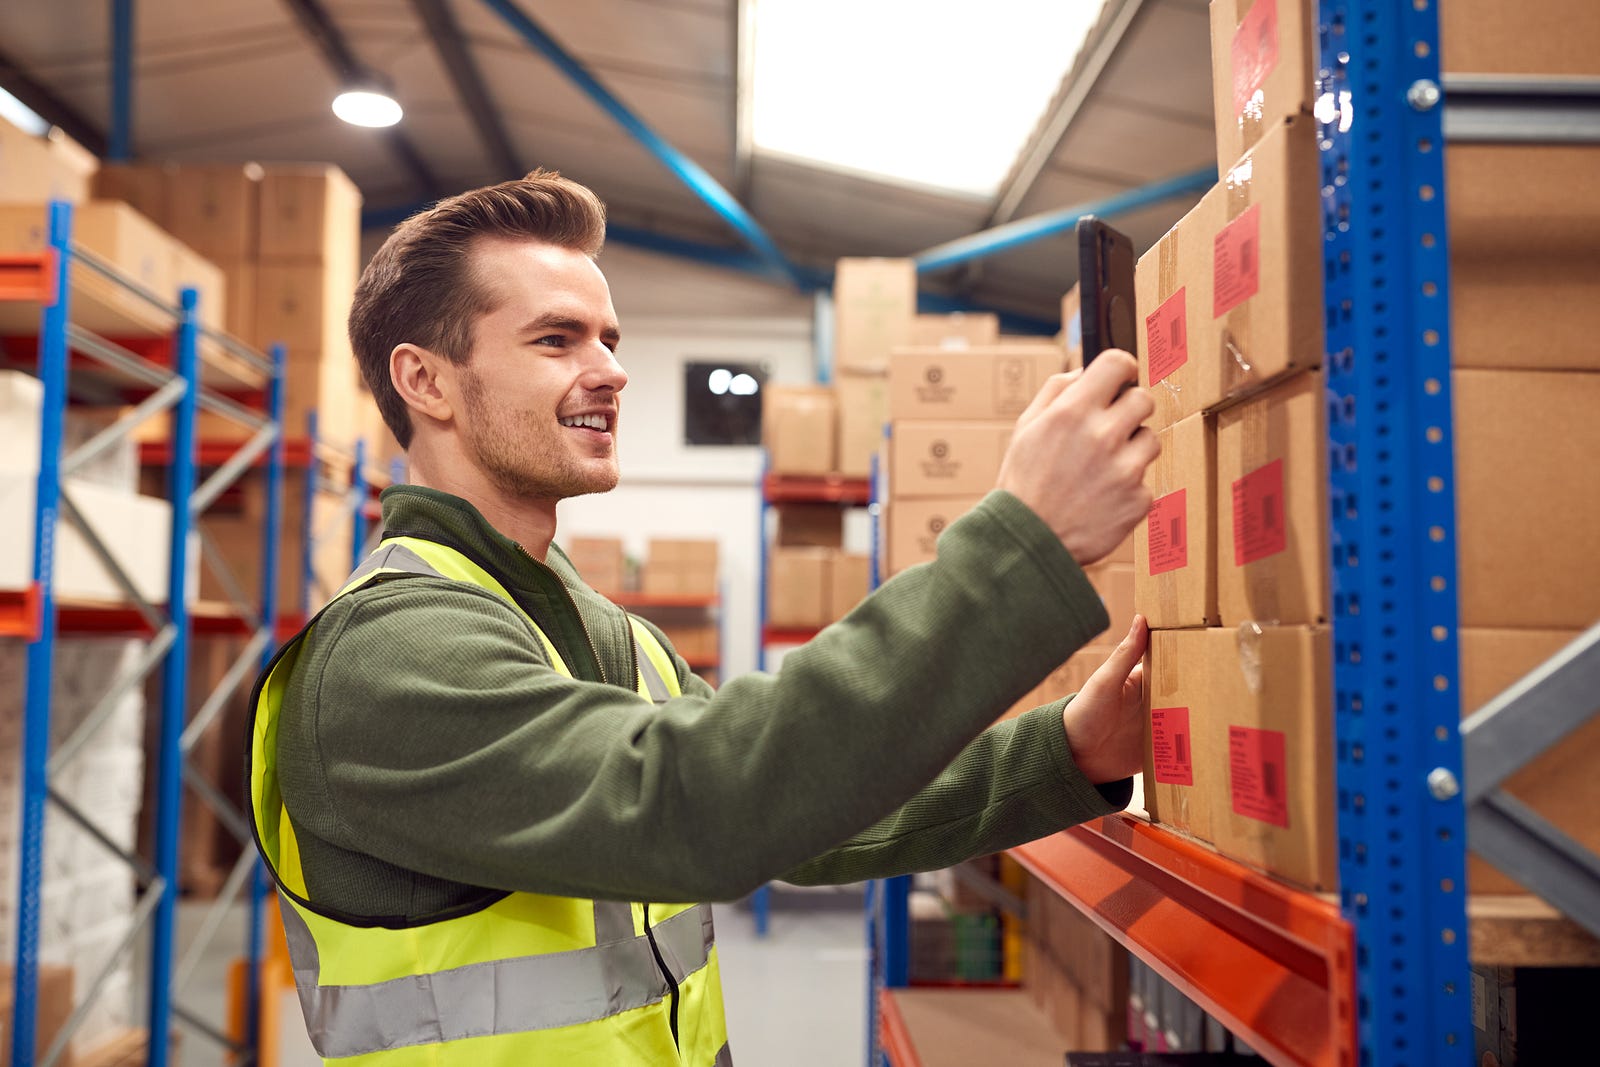 Warehouse Management Software Timly in action